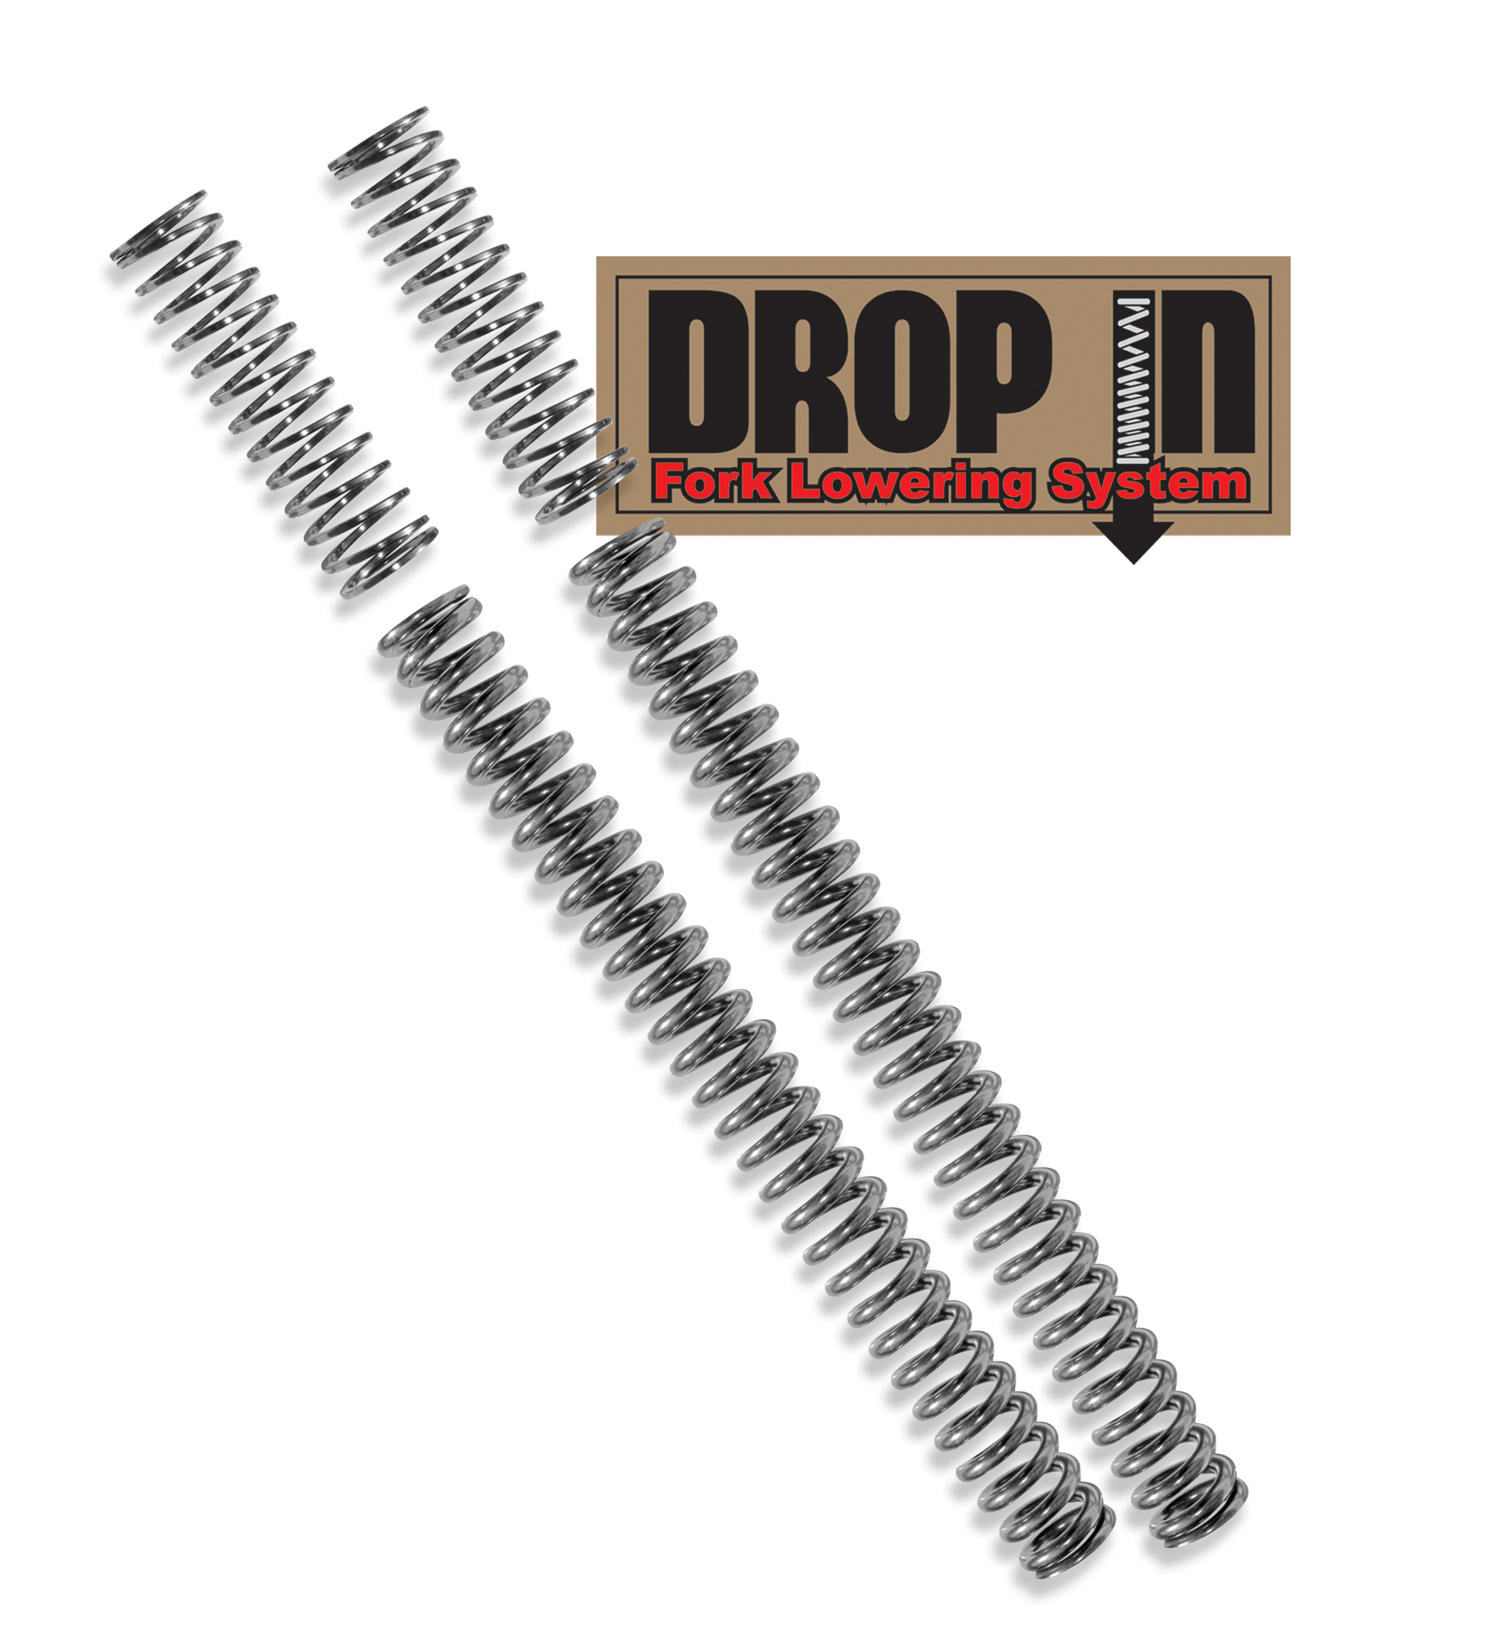 Drop-In Fork Lowering Spring Kit - Click Image to Close